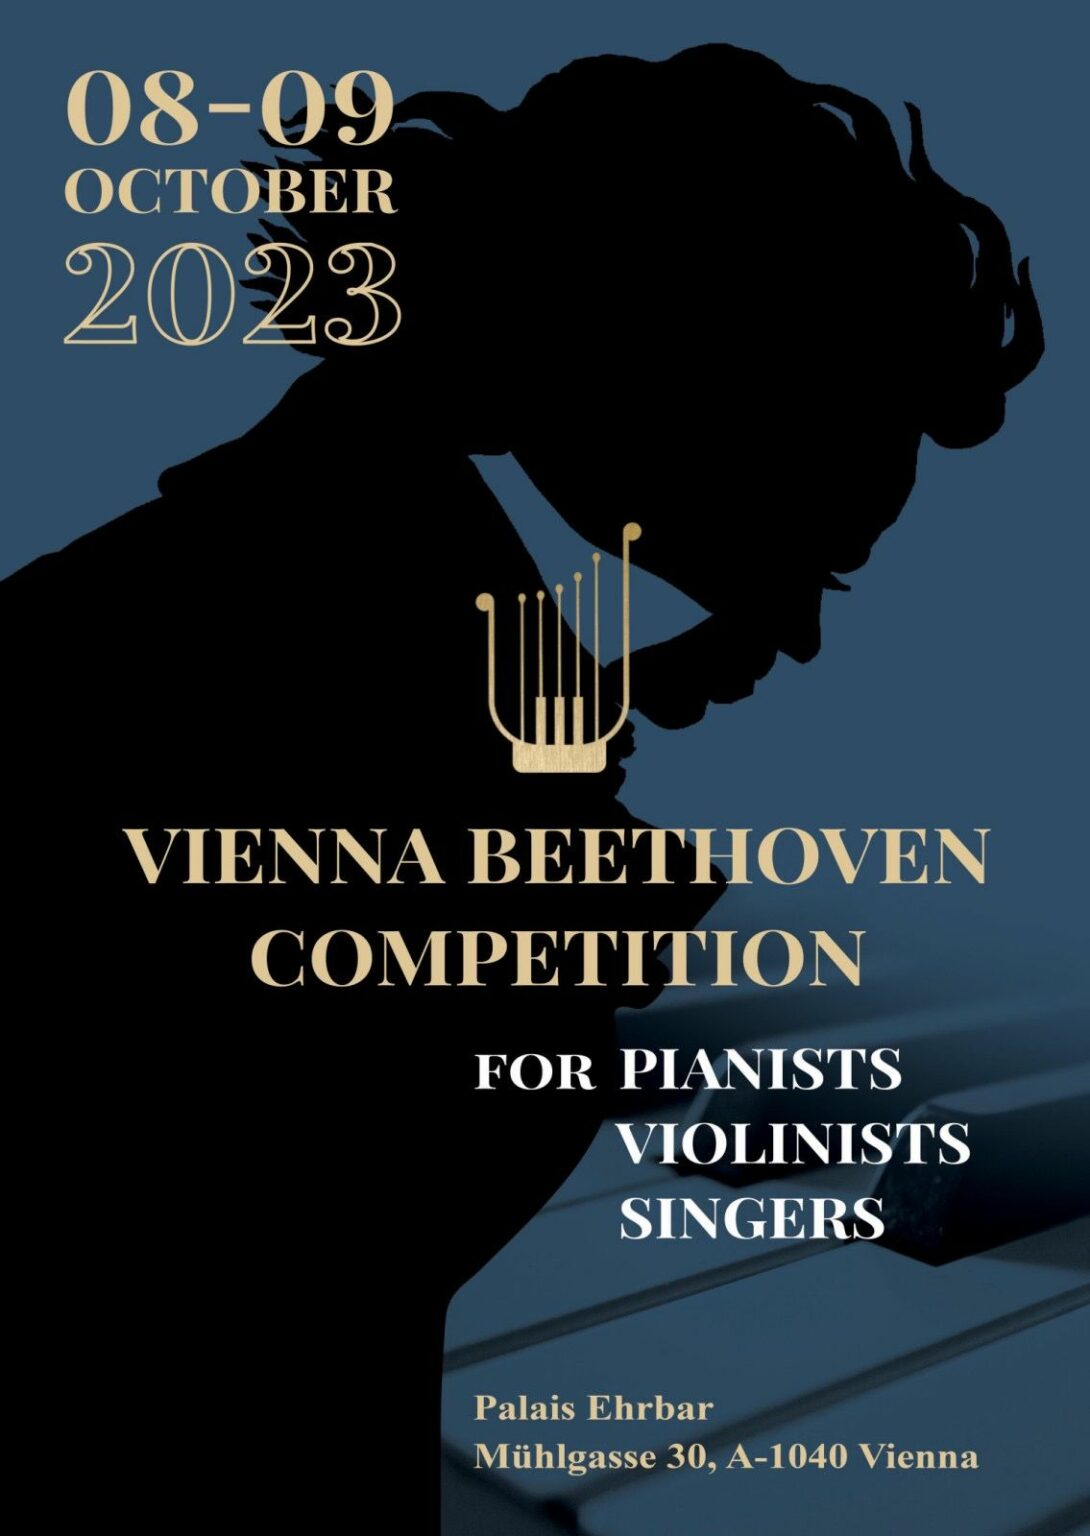 The poster of the competition shows on the top left the date of the competition on 8 and 9 October 2023, in the middle the logo of the Vienna Beethoven Conservatory and below the logo the Vienna Beethoven Competition and just afterwards the directions of the competition, i.e. for pianists, violinists and vocalists. At the bottom right is the location of the competition, namely Palais Ehrbar, Mühlgasse 30, A-1040 Vienna. In the background of the poster is a dark blue background with a black silhouette of Ludwig van Beethoven's profile and an enlarged section of the piano keyboard.